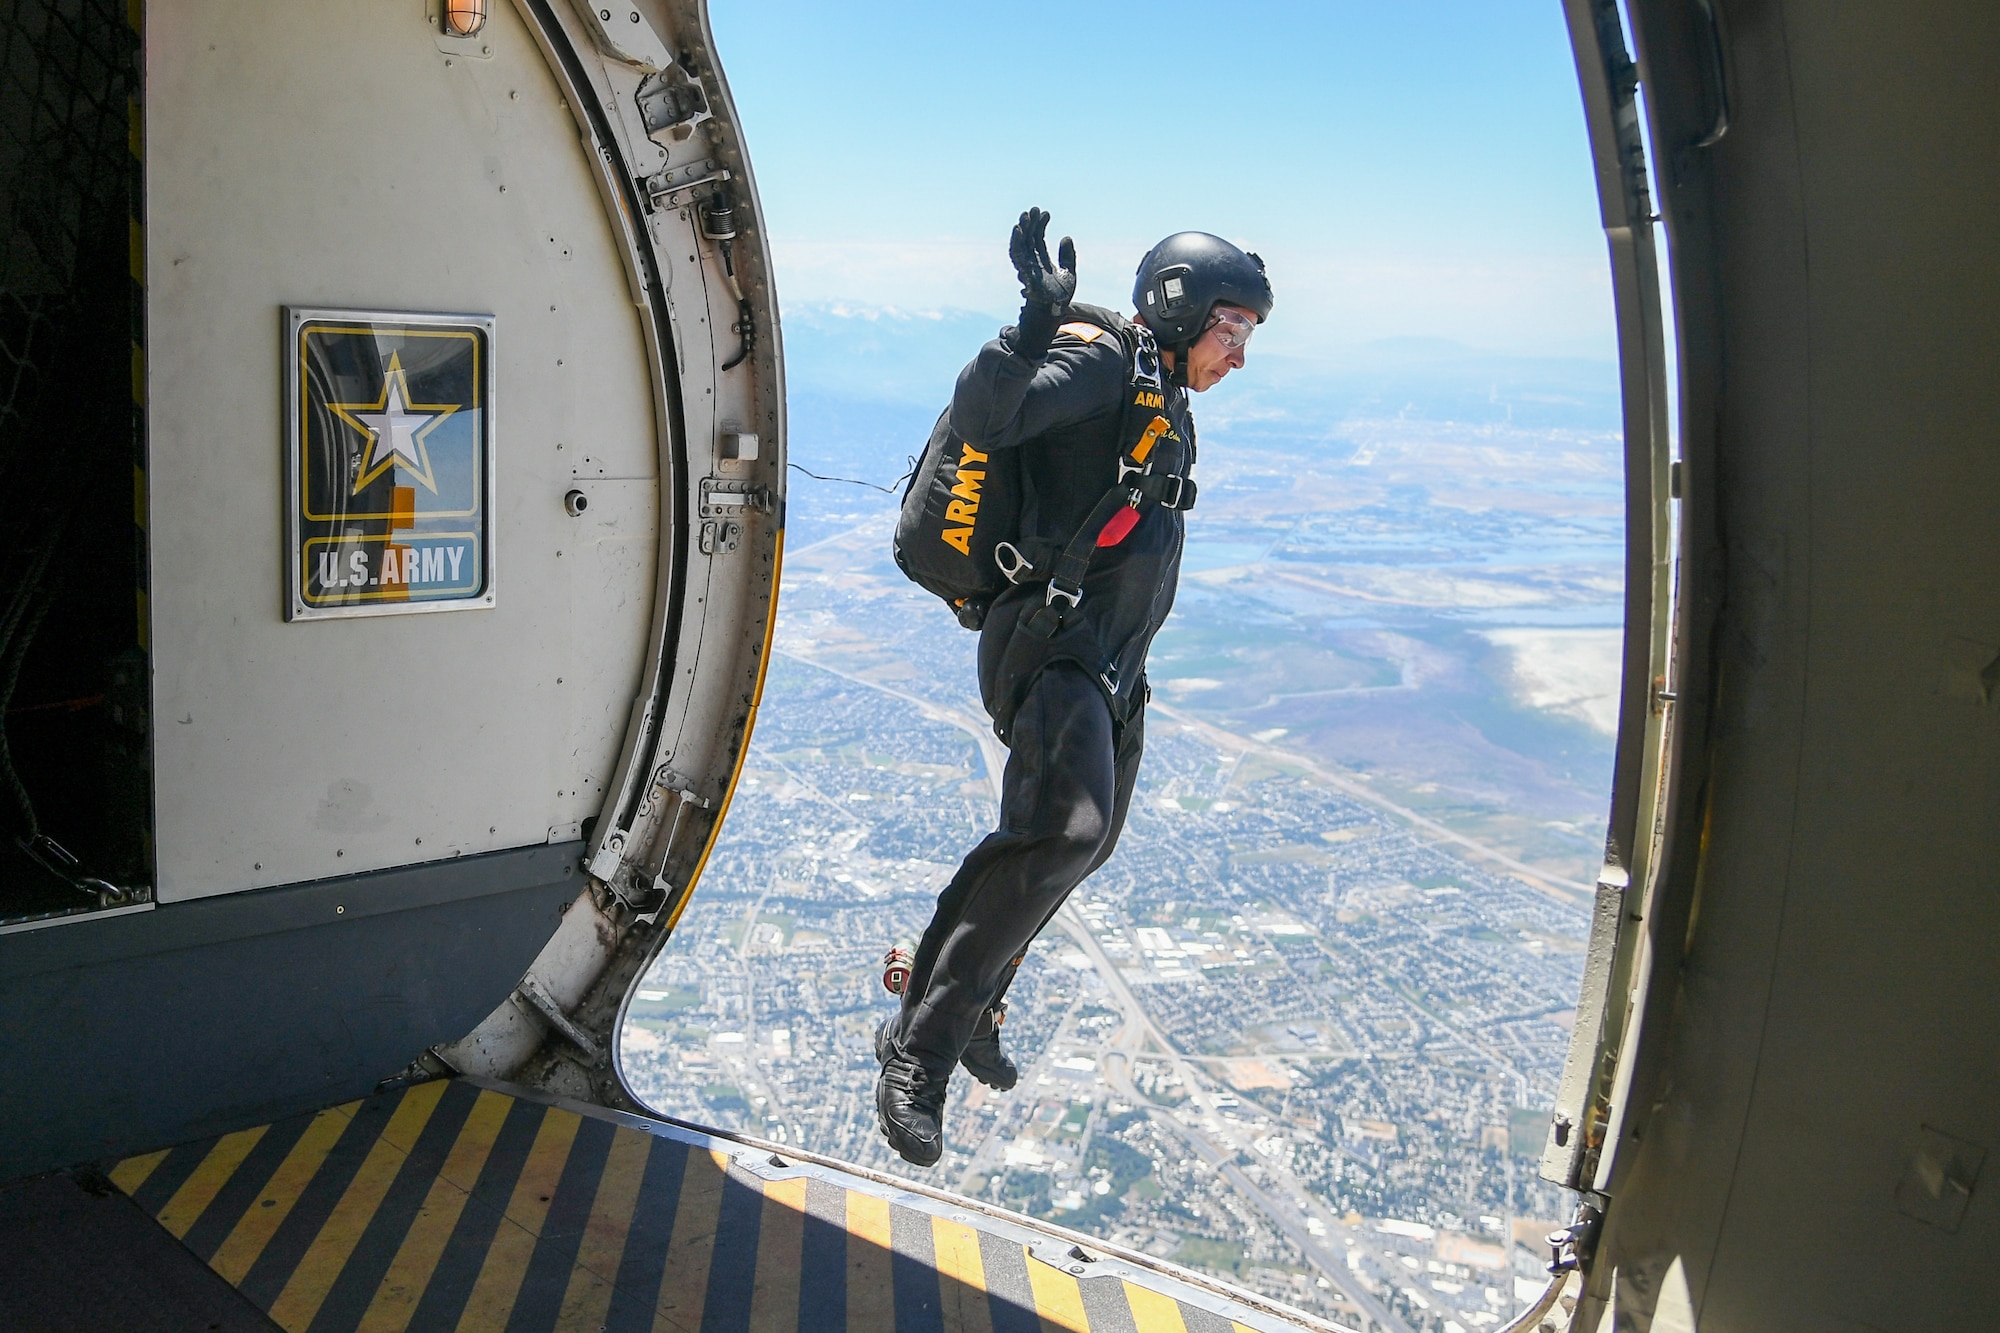 A Golden Knights team member pictured mid-air outside the aircraft's door.